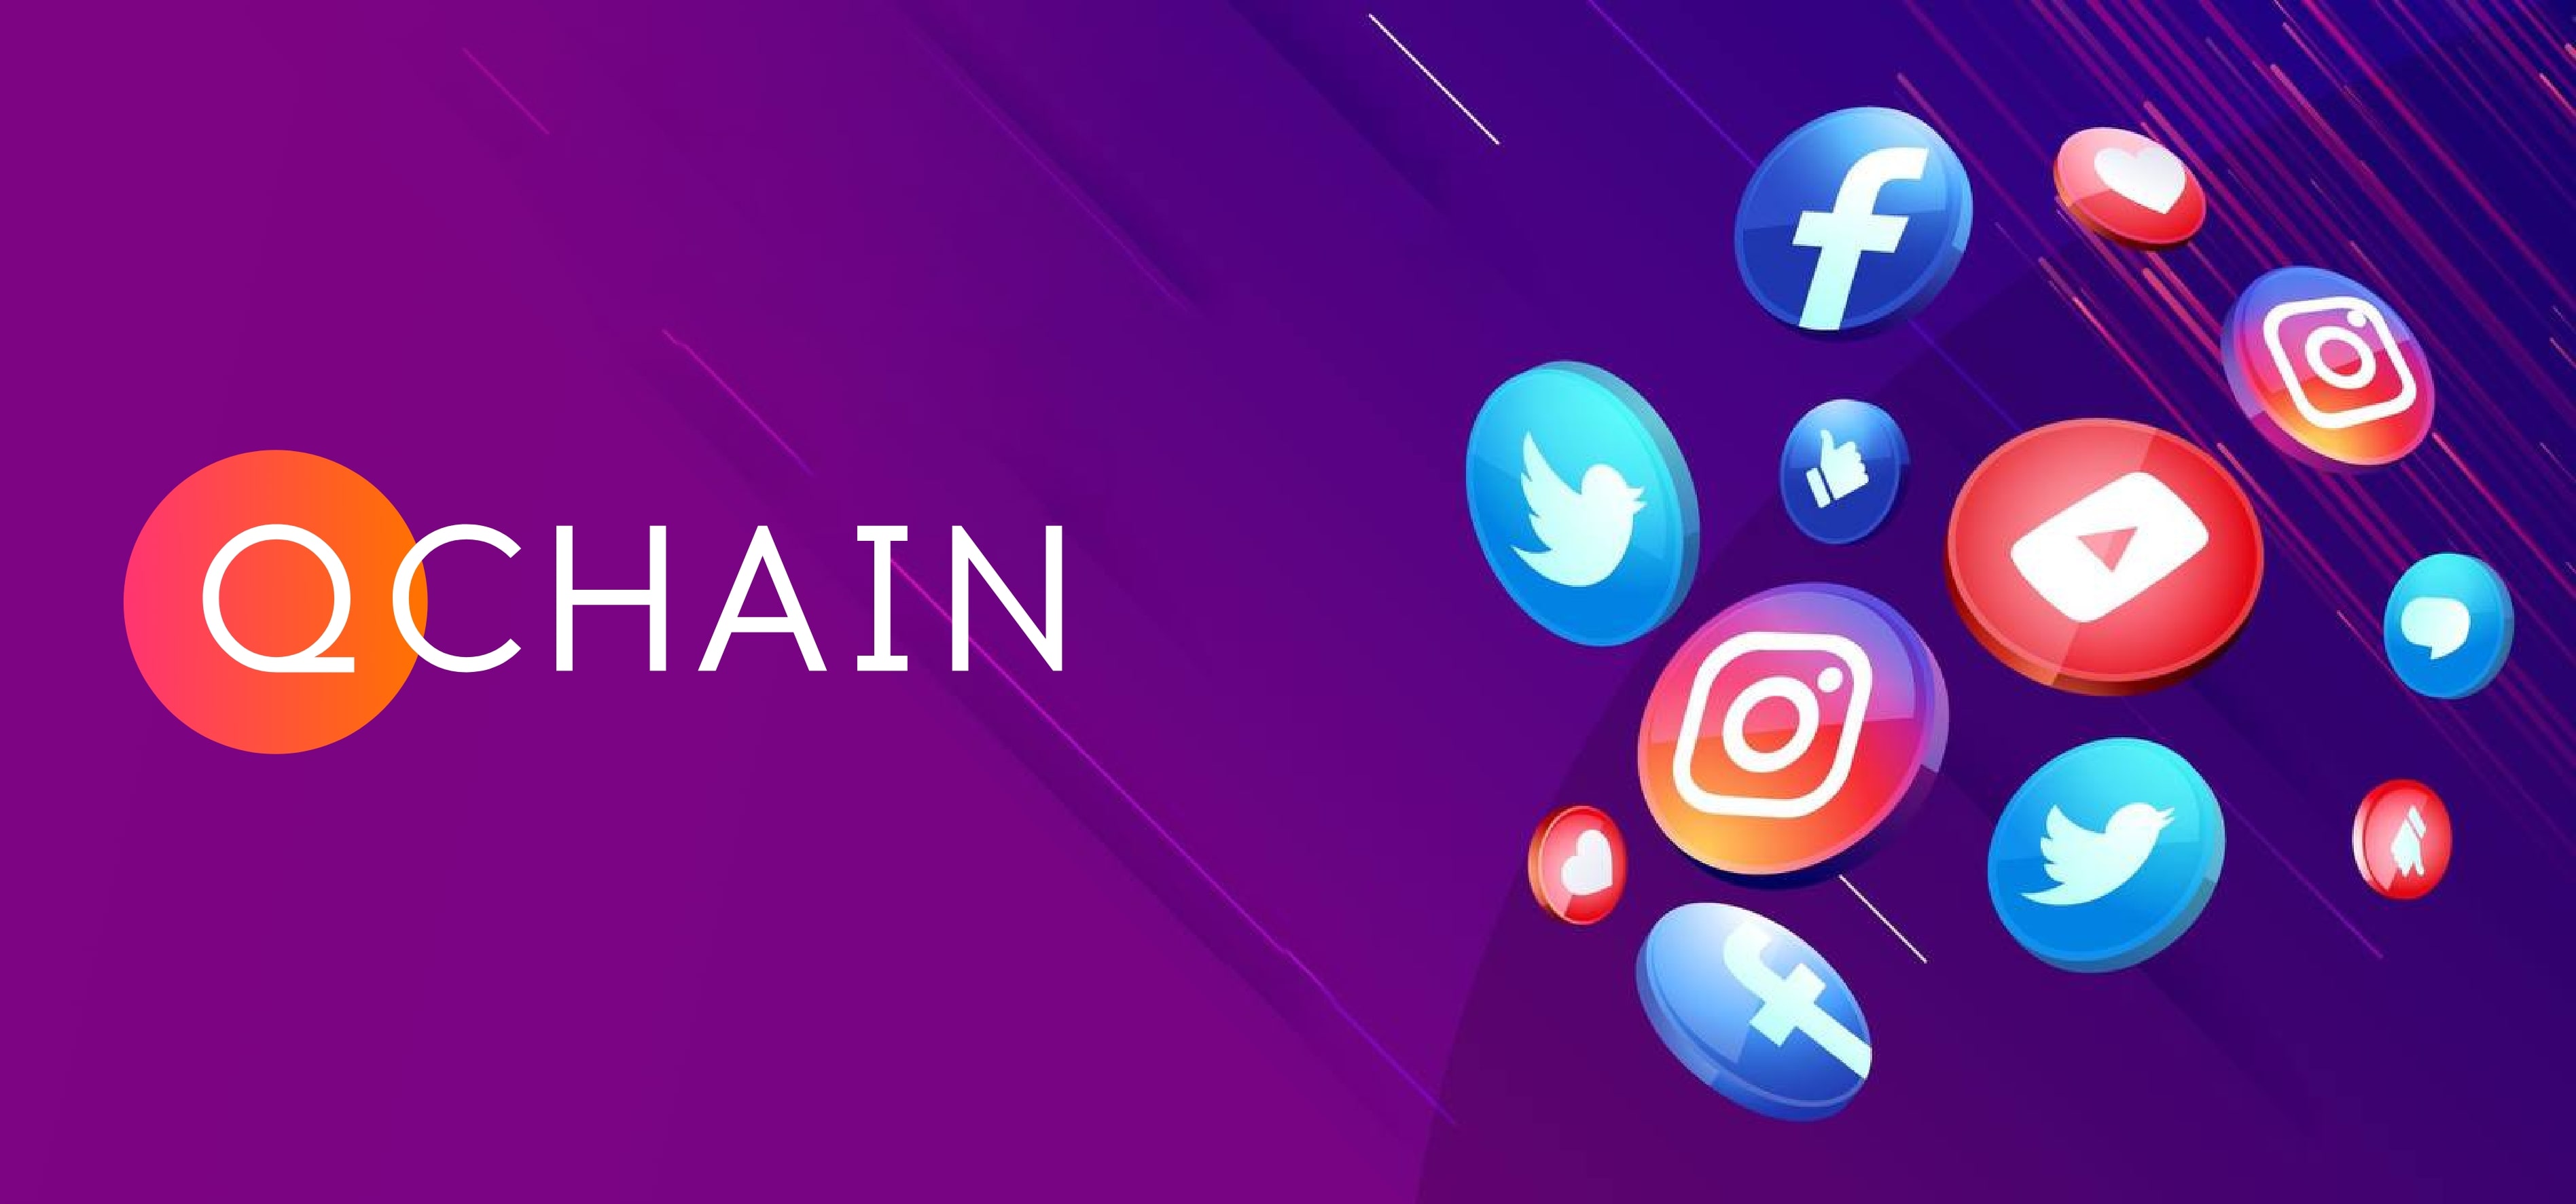 Qchain in social networks